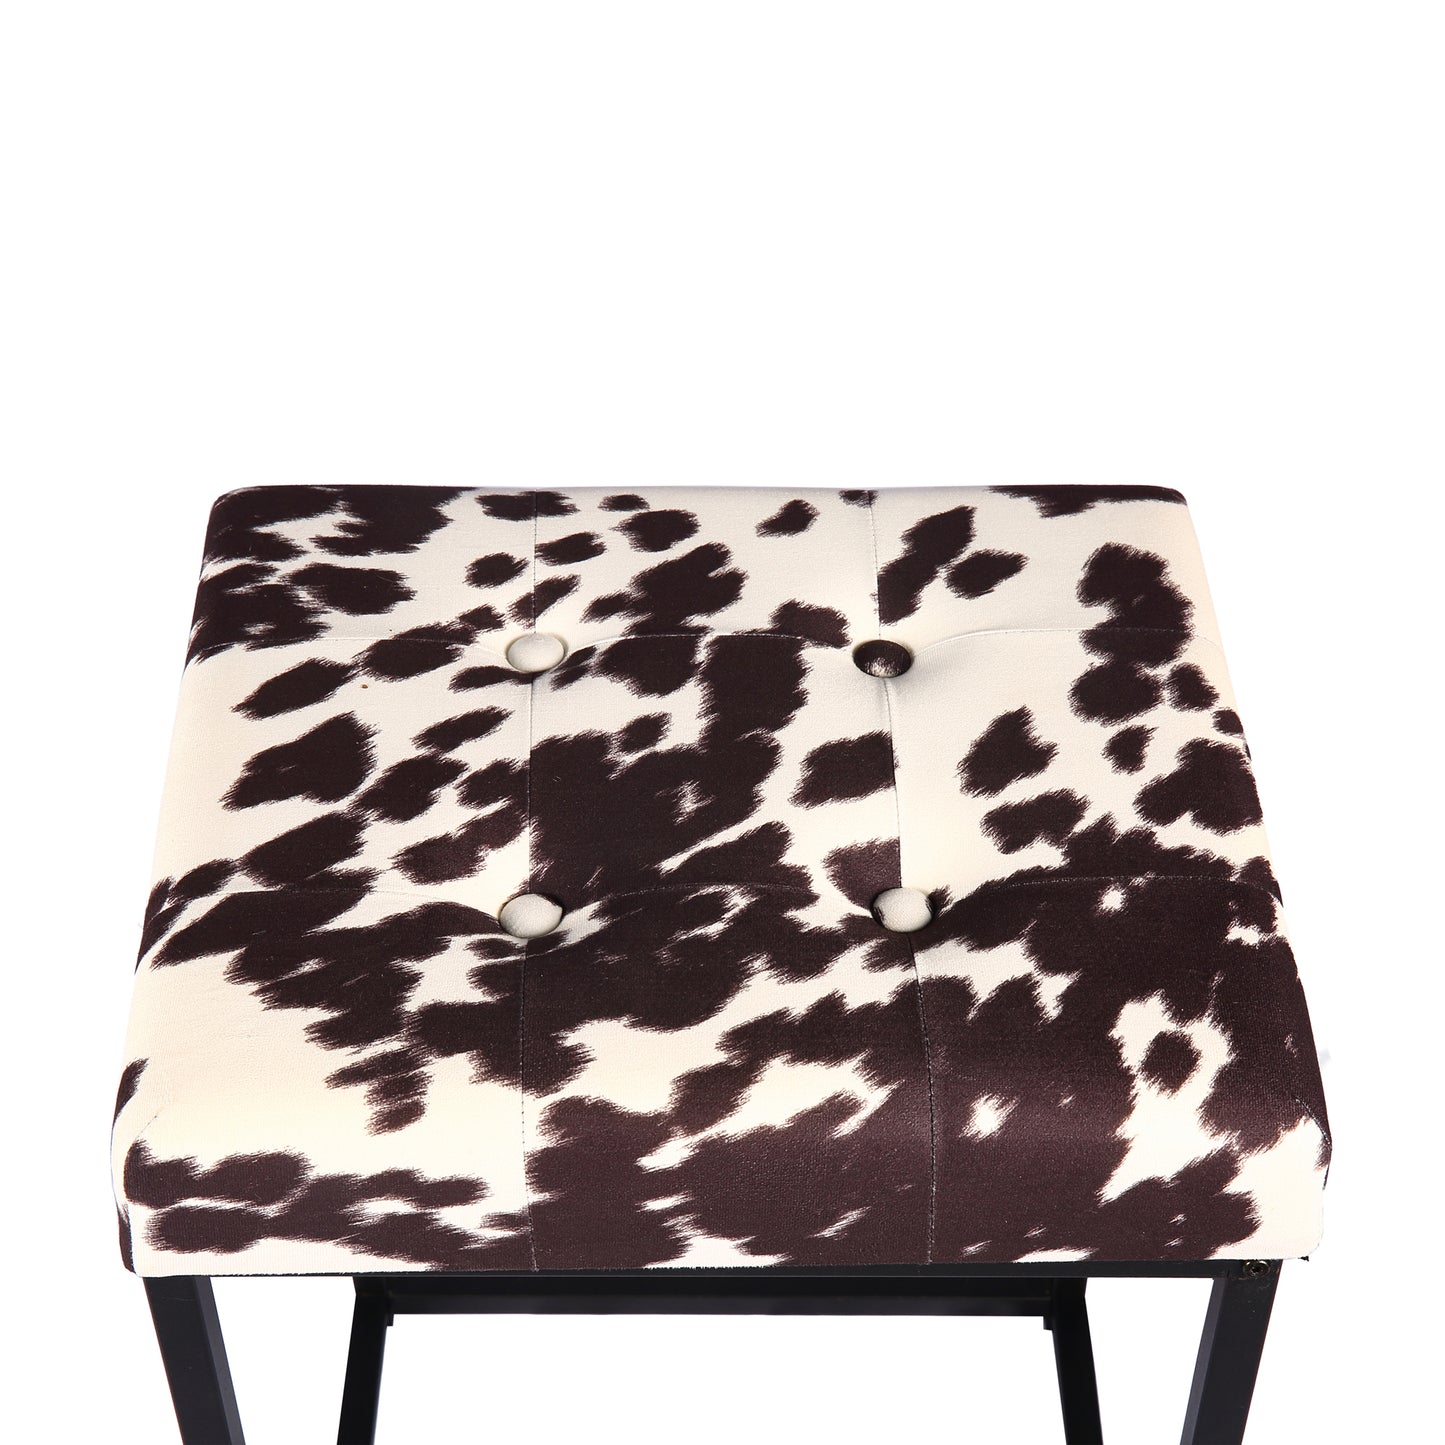 GIA 24 Inch Brown Cow Square Stool